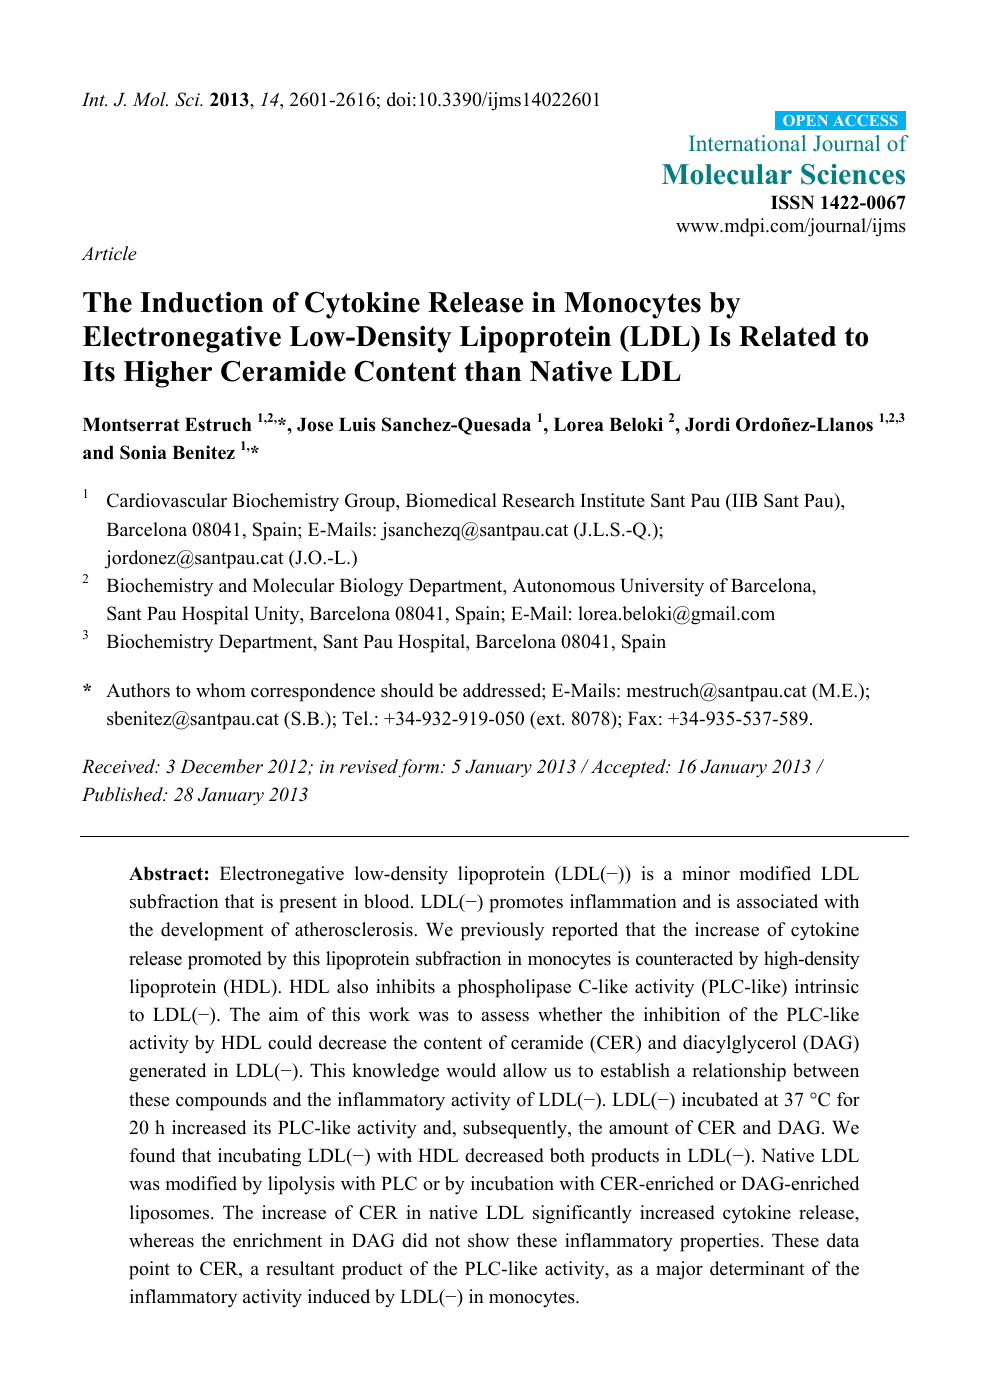 The Induction Of Cytokine Release In Monocytes By Electronegative Low Density Lipoprotein Ldl Is Related To Its Higher Ceramide Content Than Native Ldl Topic Of Research Paper In Biological Sciences Download Scholarly